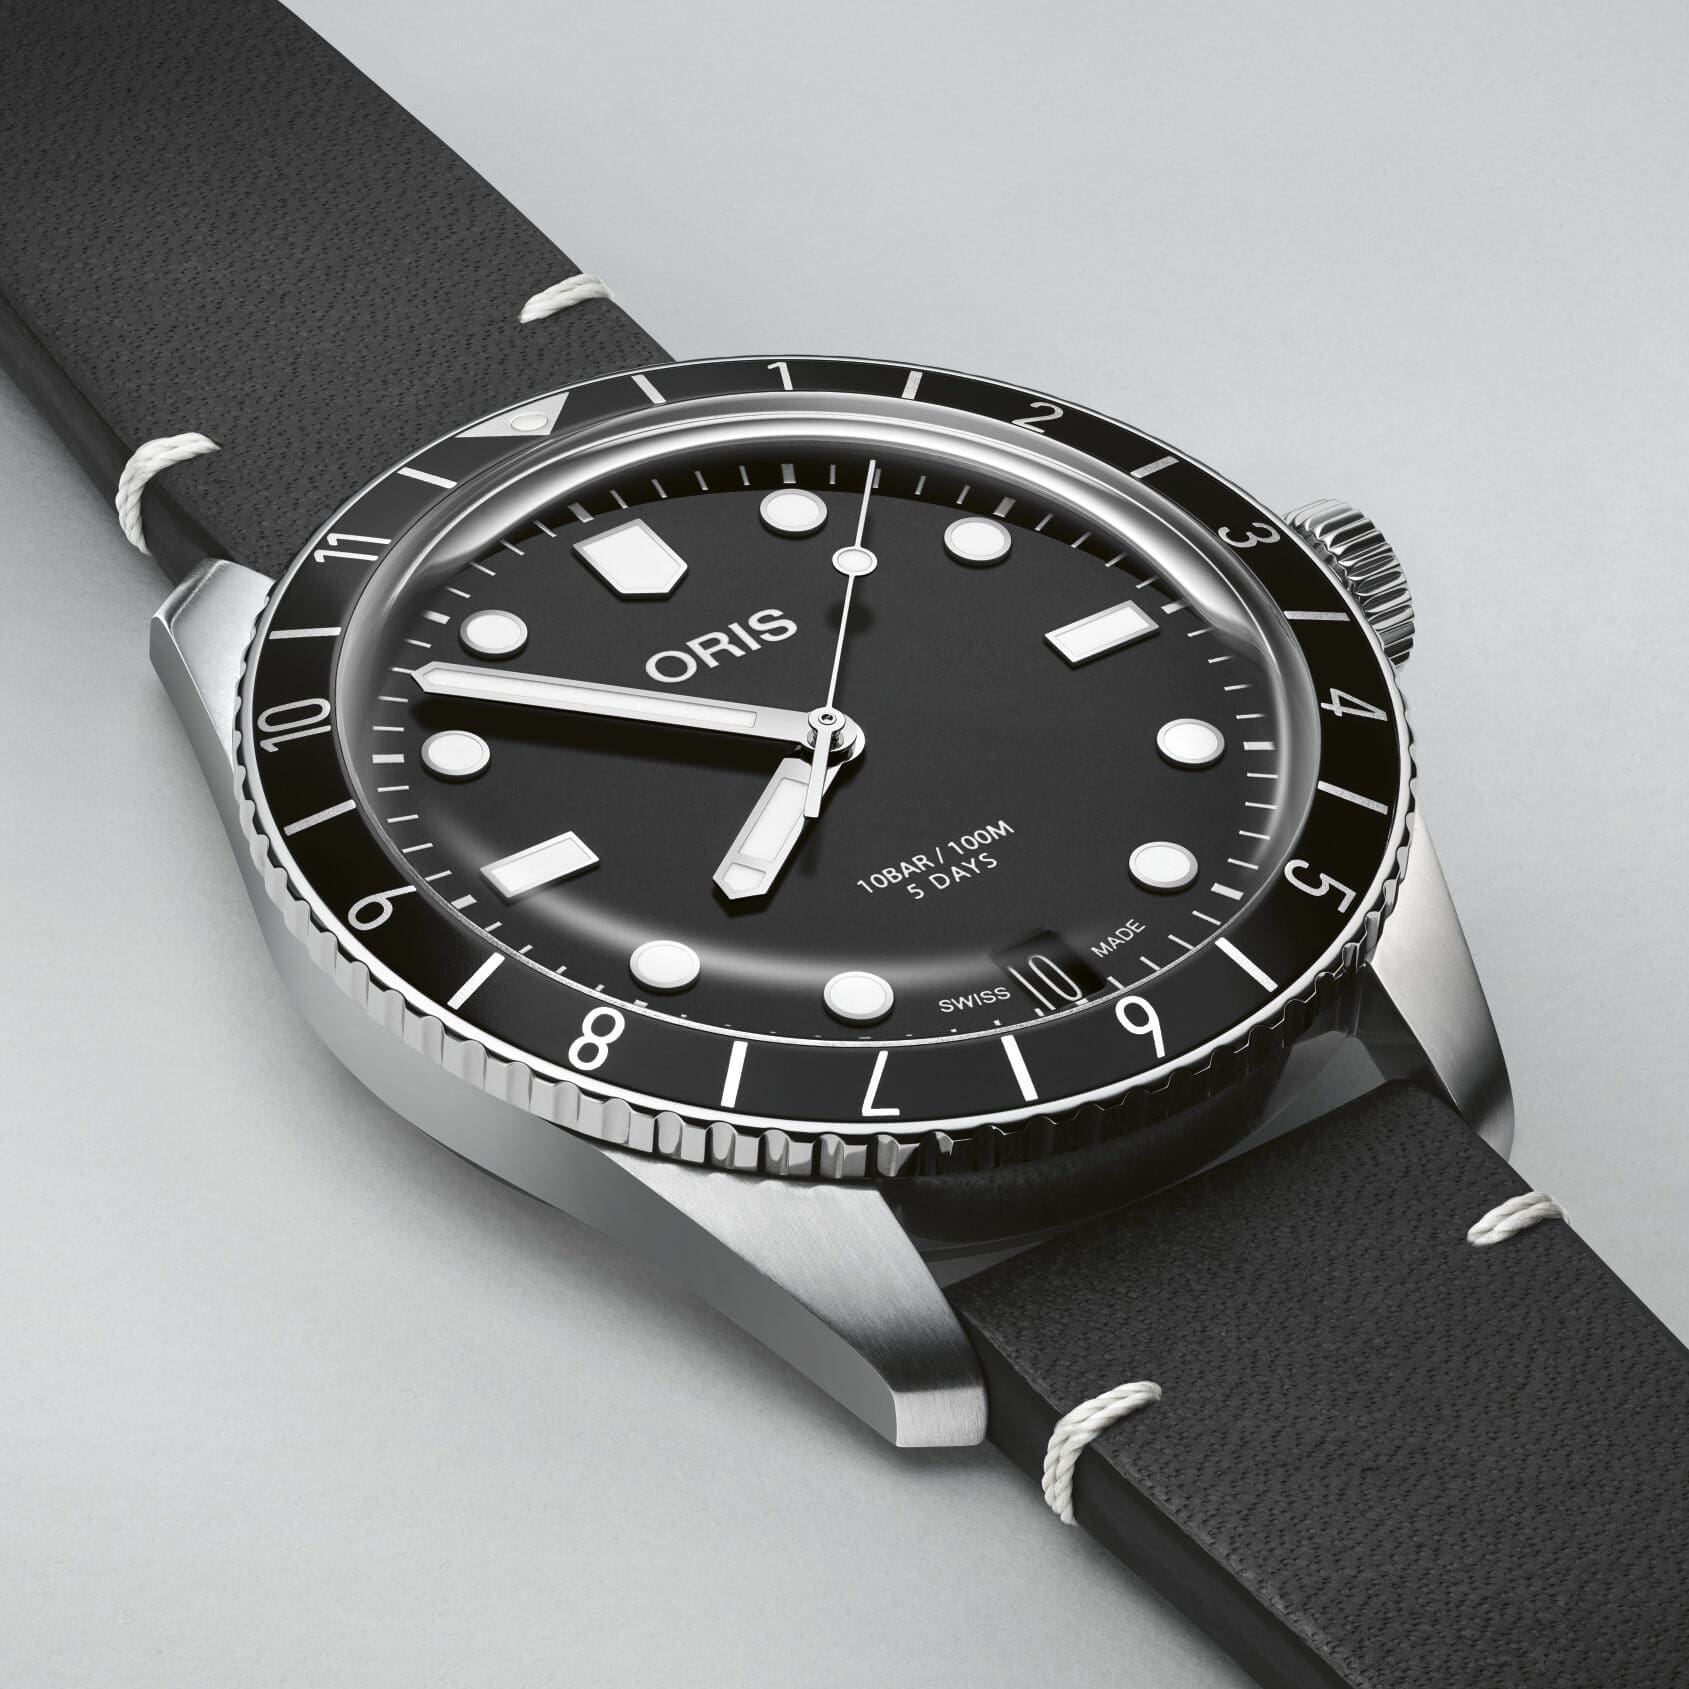 GENEVA WATCH DAYS:  Oris delivers new Divers Sixty-Five with caliber 400 movement and more